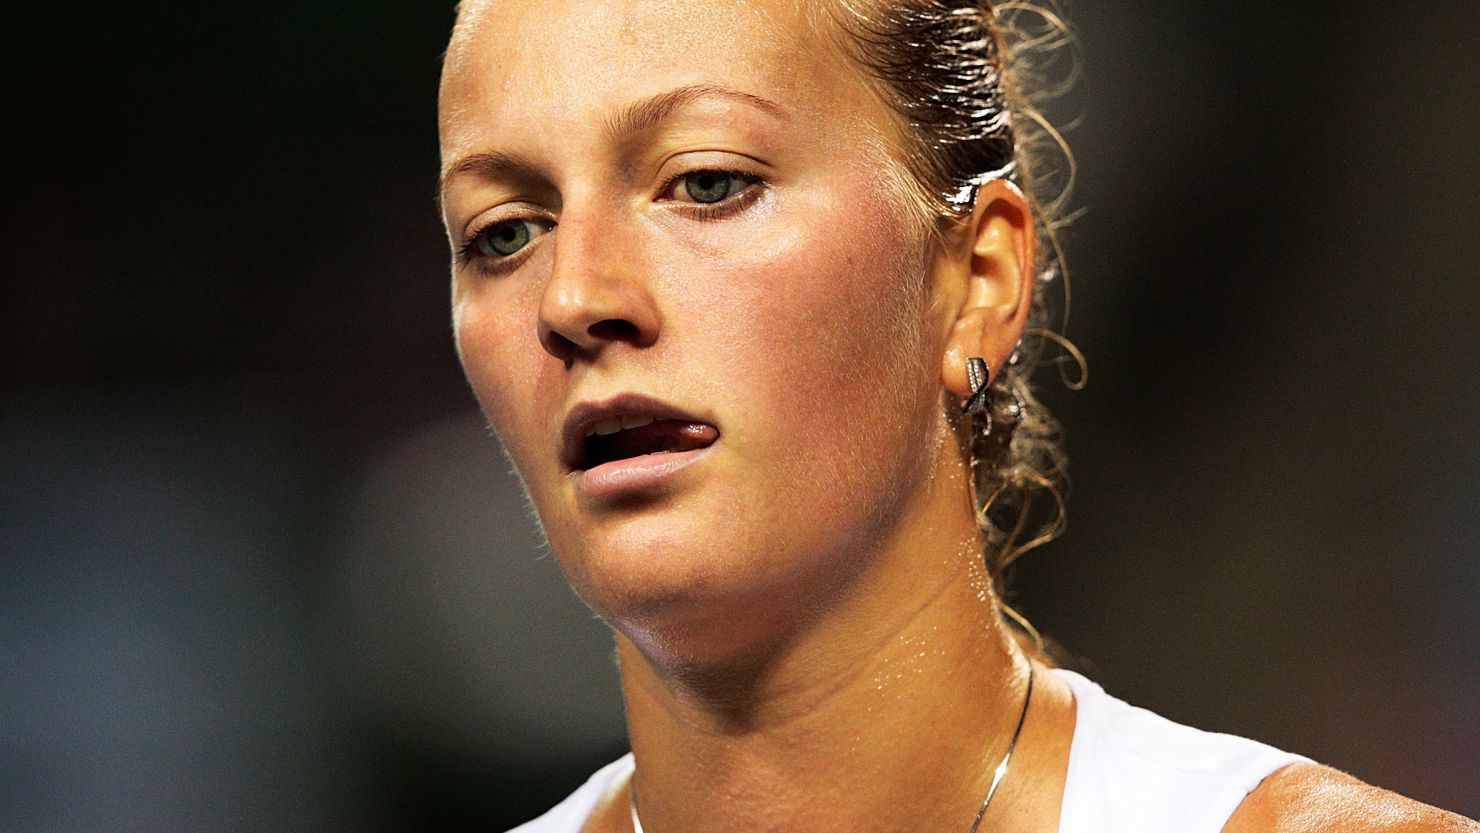 A dejected Petra Kvitova slides to defeat against unseeded Croatian Petra Martic in Tokyo.